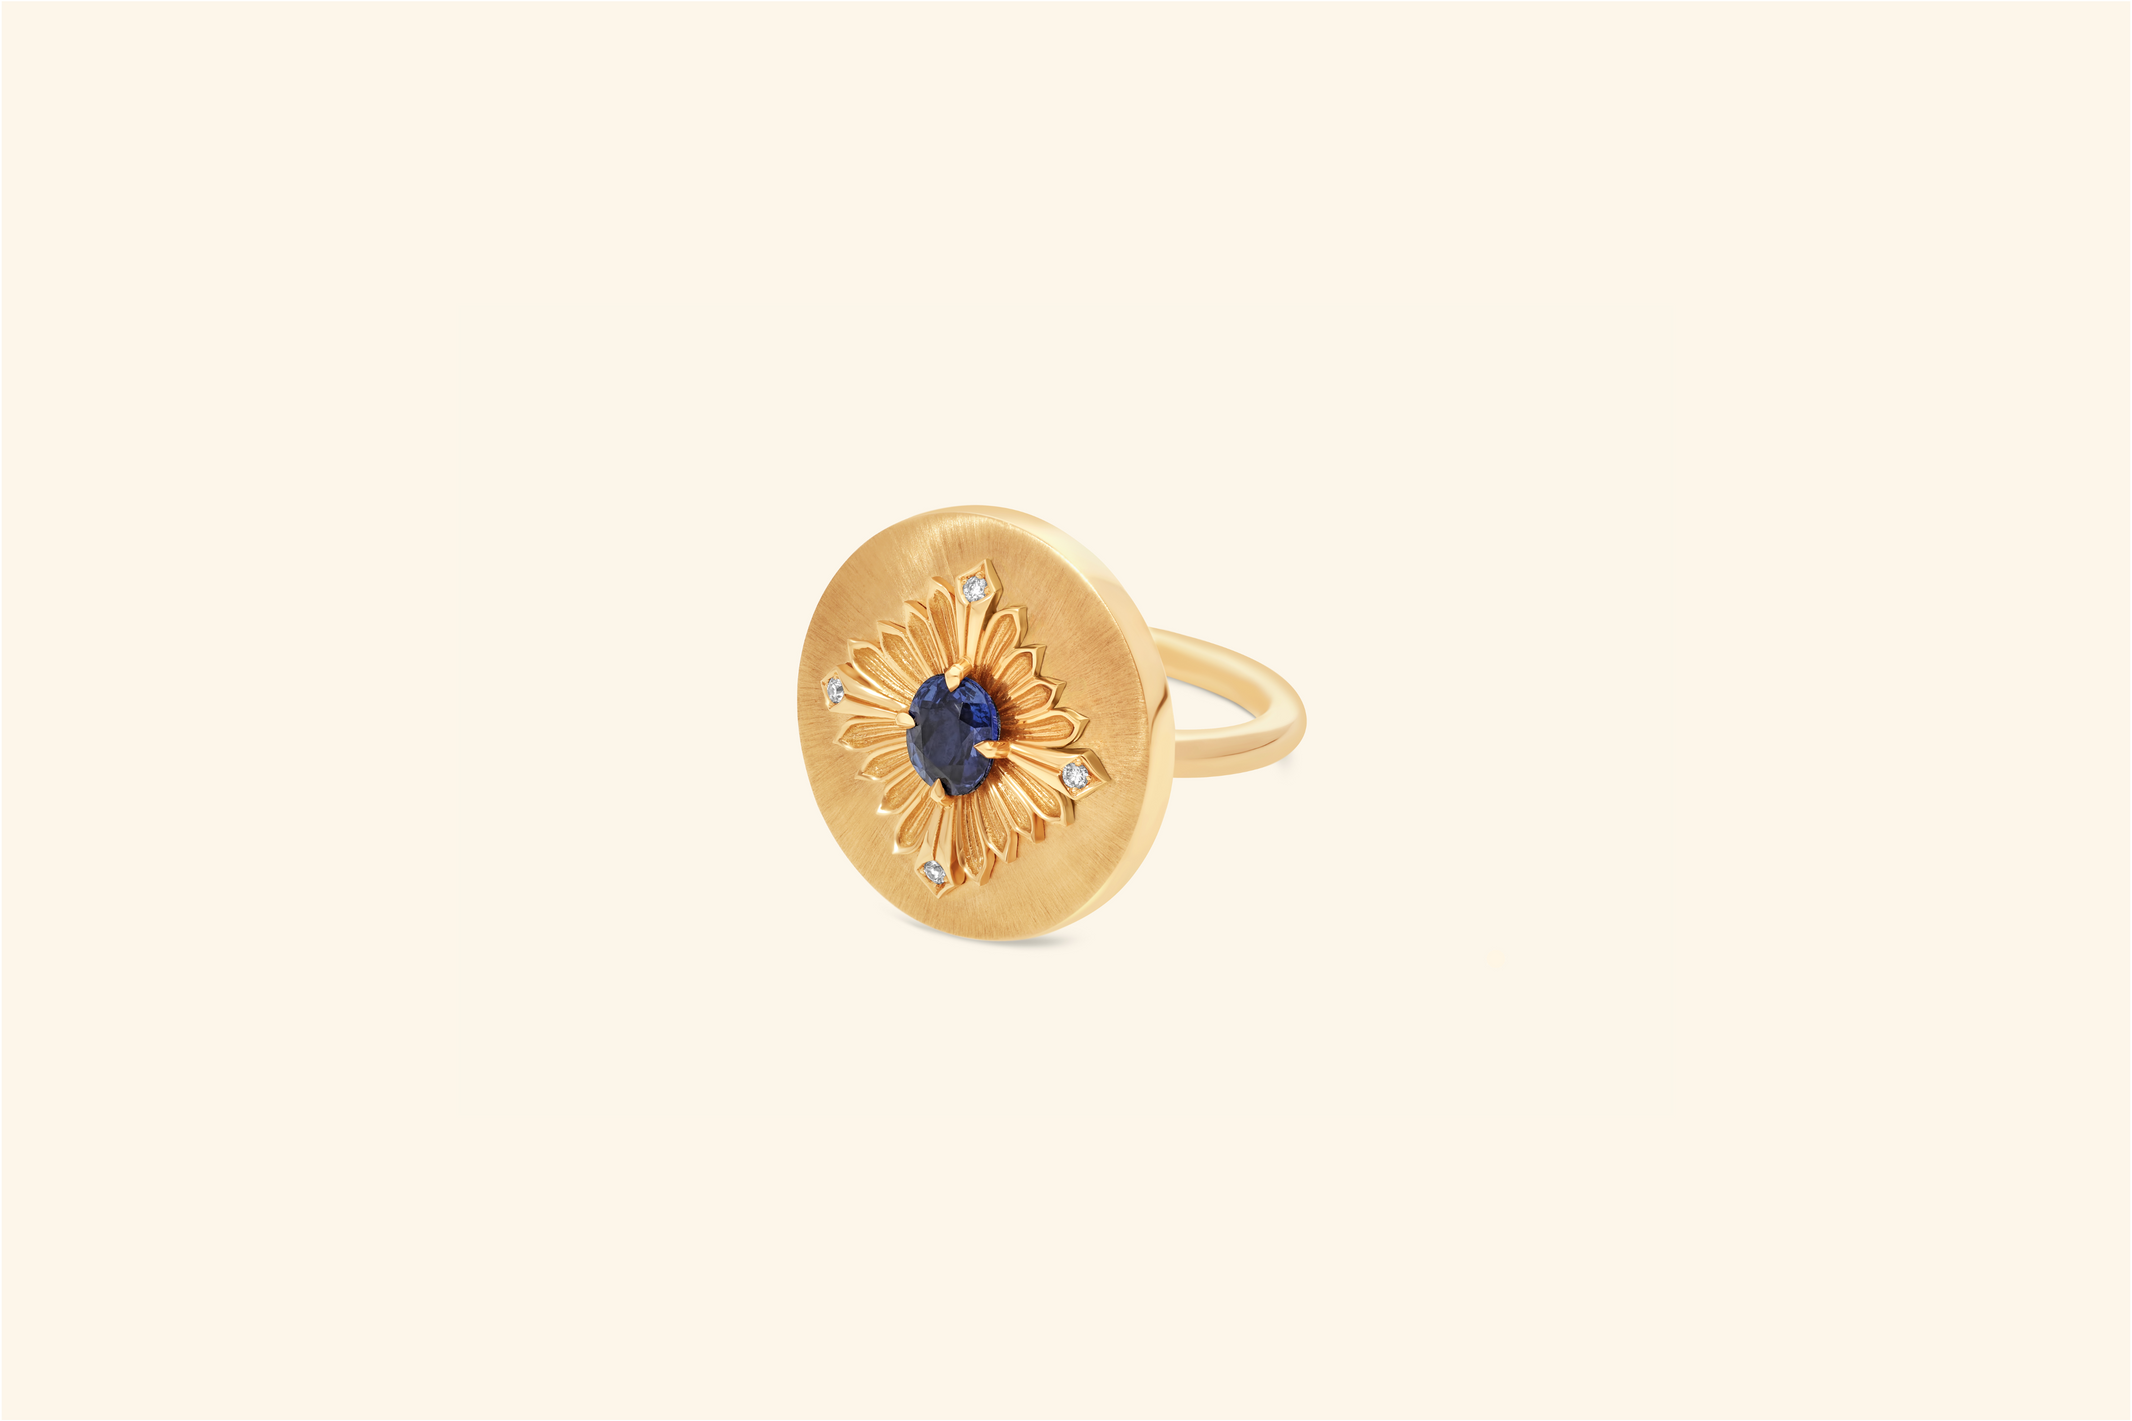 Tag ring, yellow gold, sapphire and diamonds